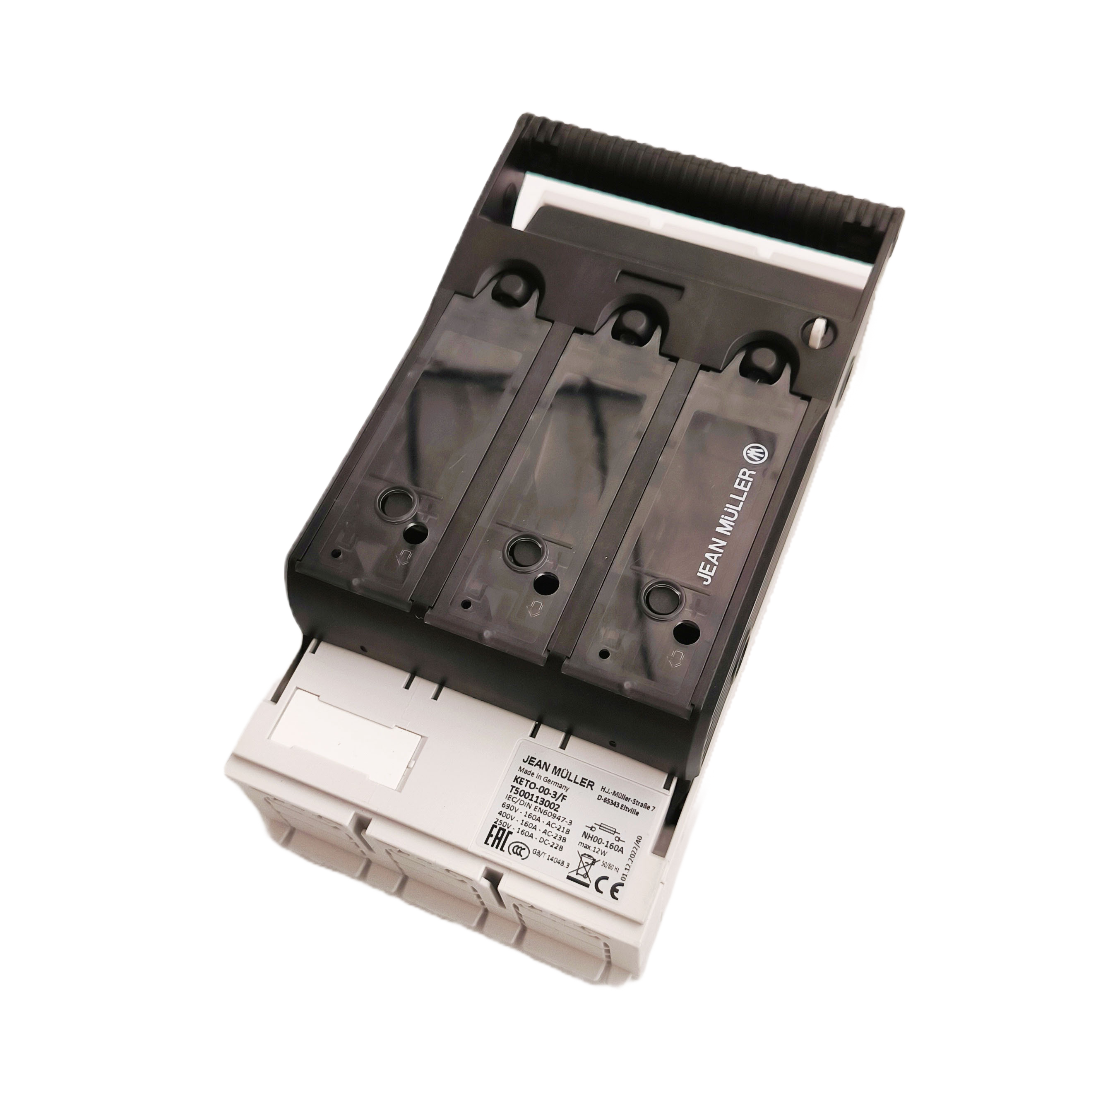 Jean Muller KETO-00 Battery Disconnector with 160A Fuses